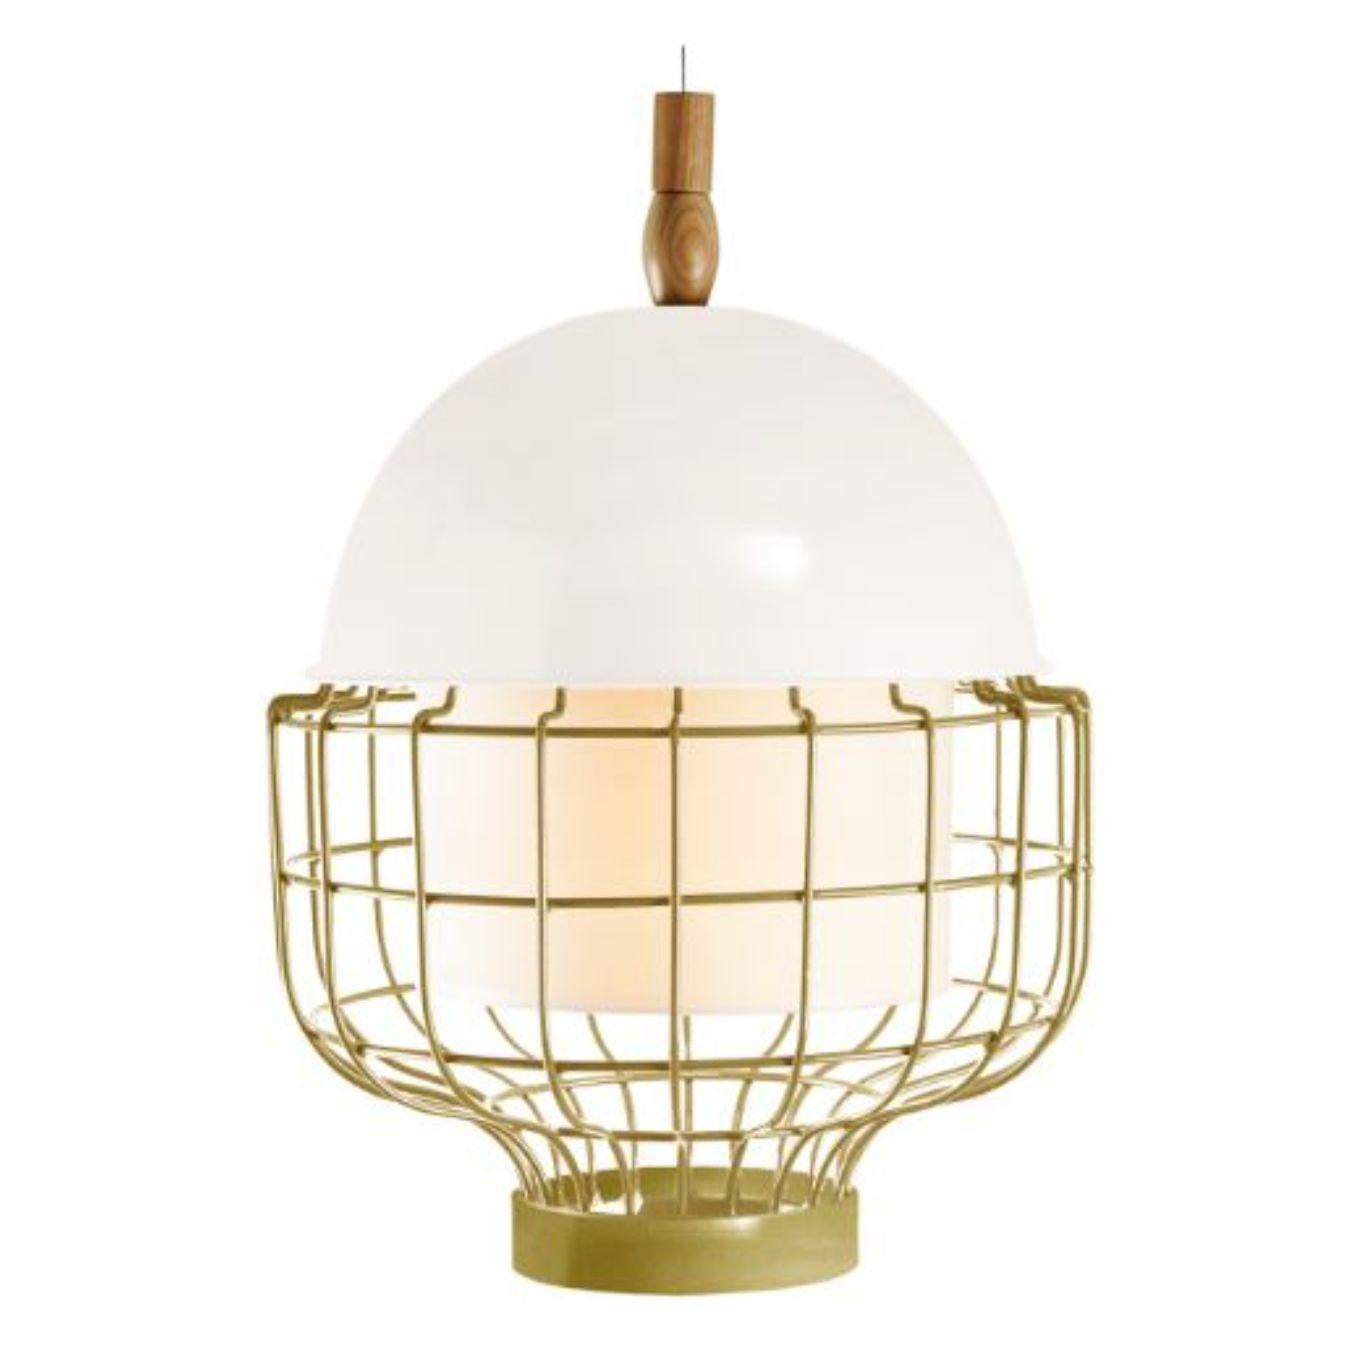 Yellow Magnolia III Suspension Lamp by Dooq For Sale 4